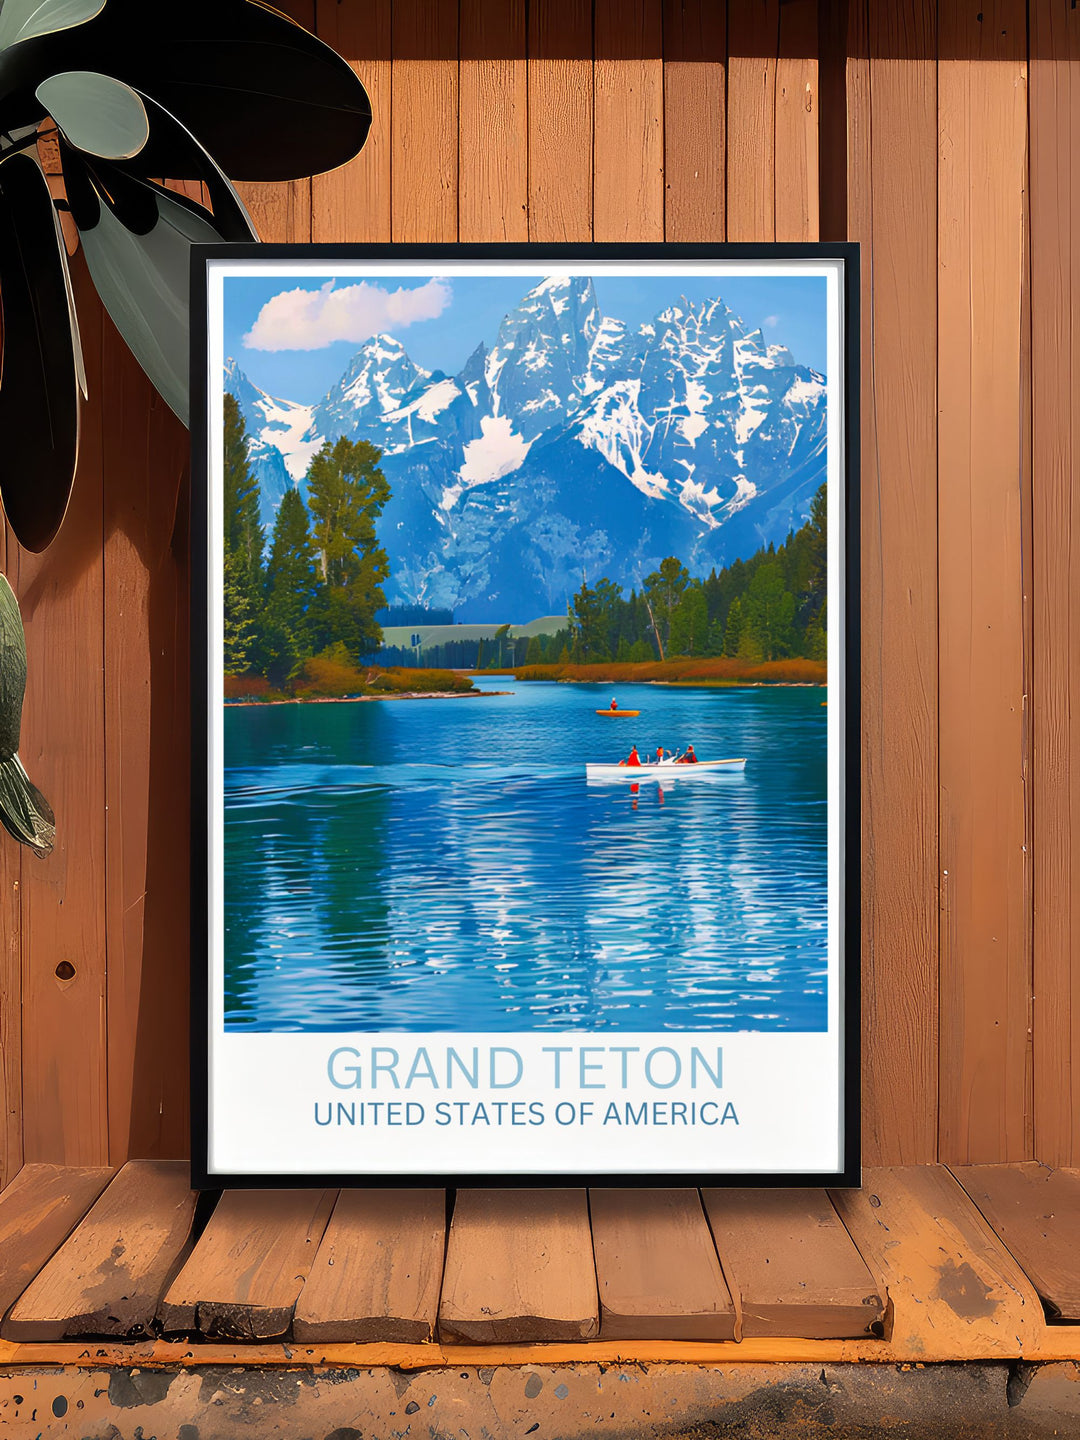 Early morning mist rising from Jackson Lake, creating a mysterious and serene setting for this unique wall art.